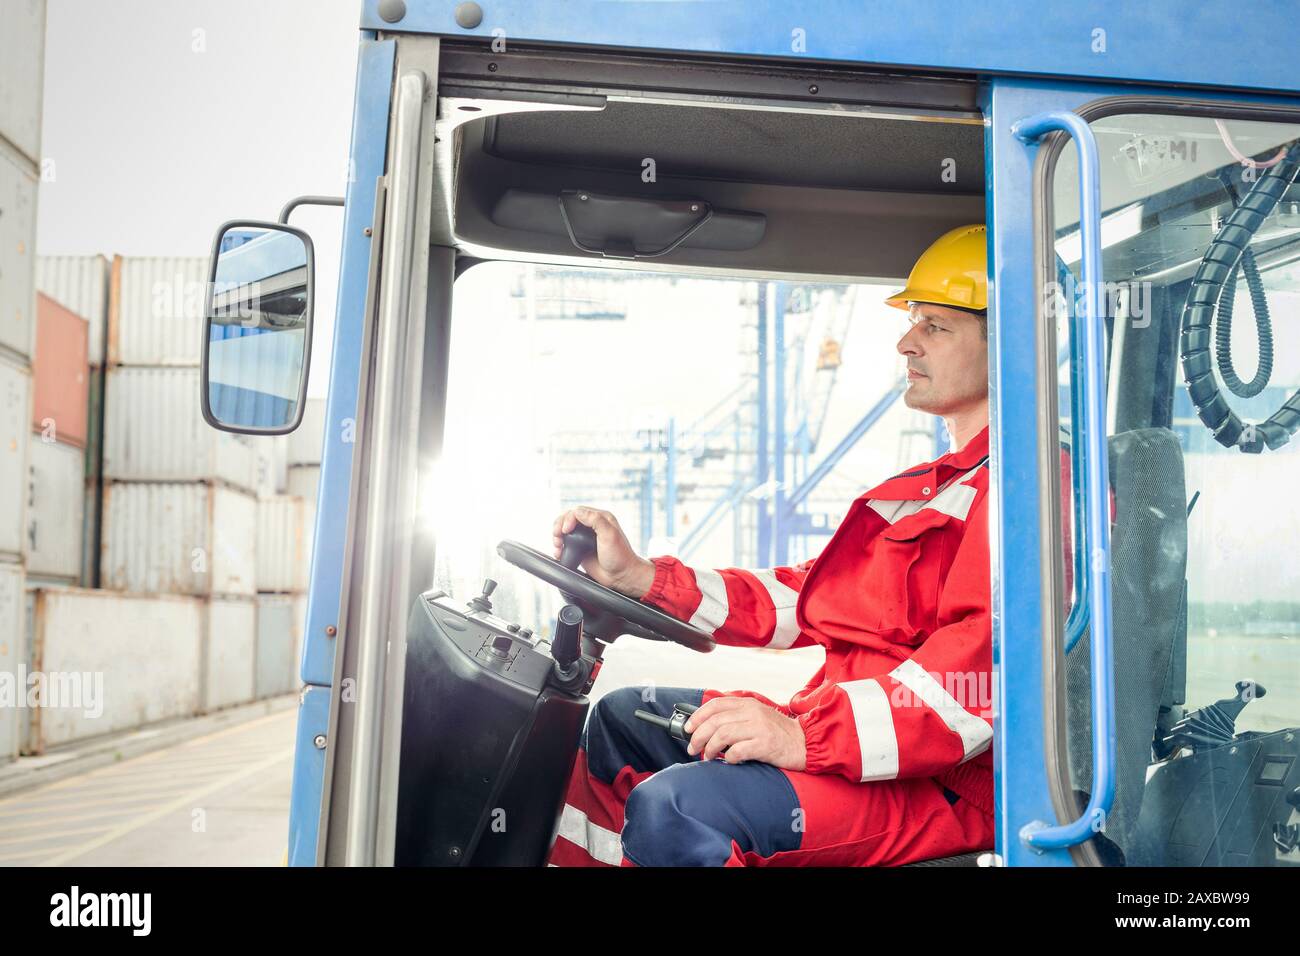 Dock worker operating cargo container forklift at shipyard Stock Photo